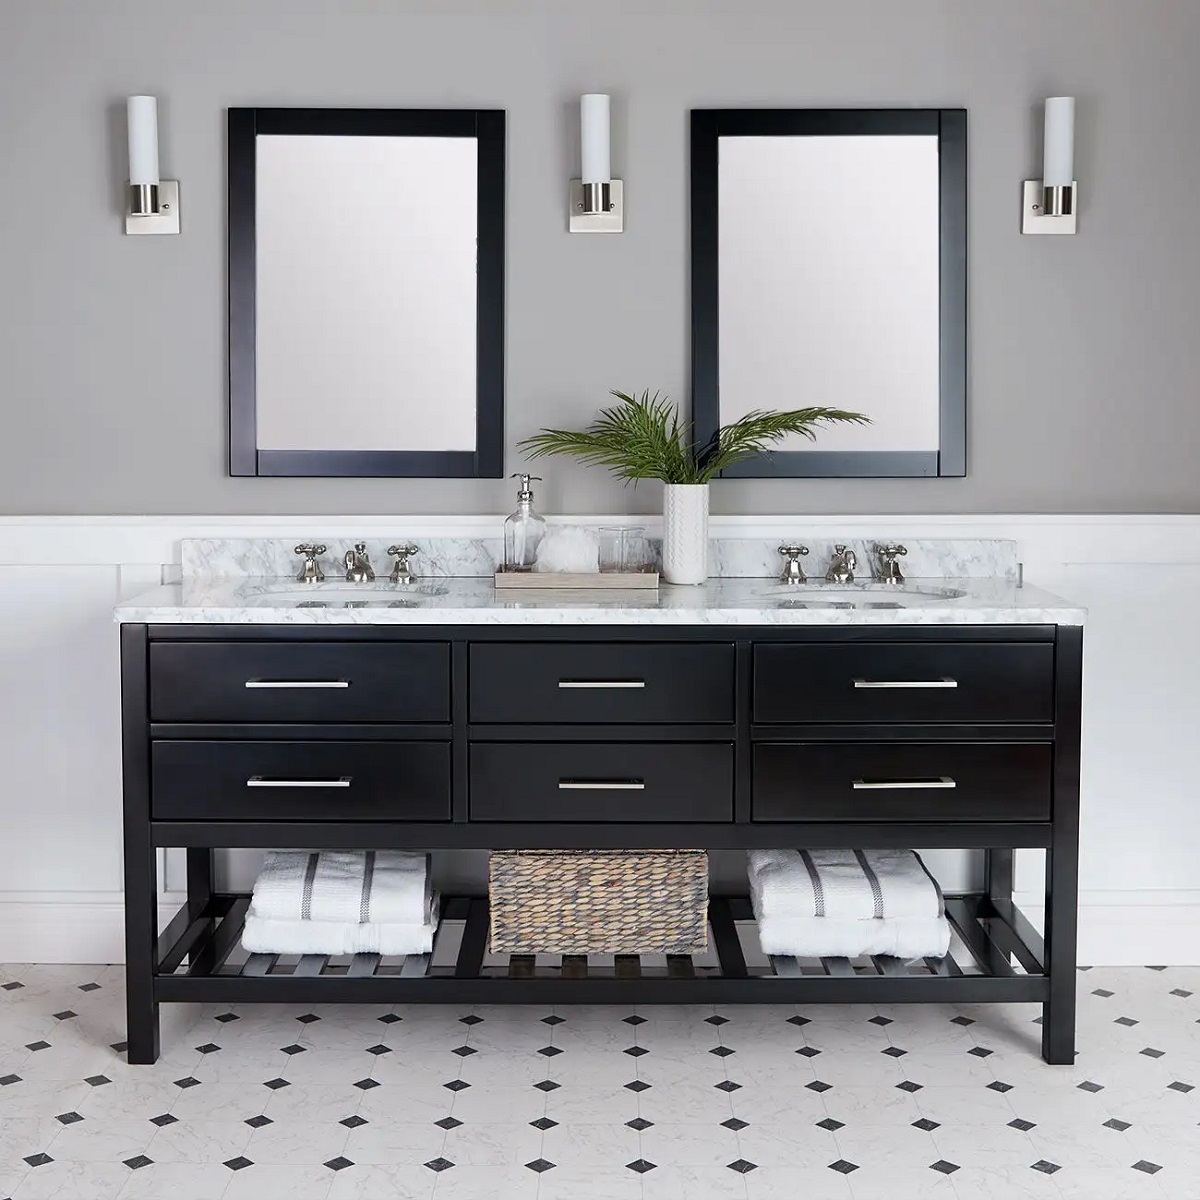 What Is The Ideal Sink Size For A 72-Inch Double Vanity